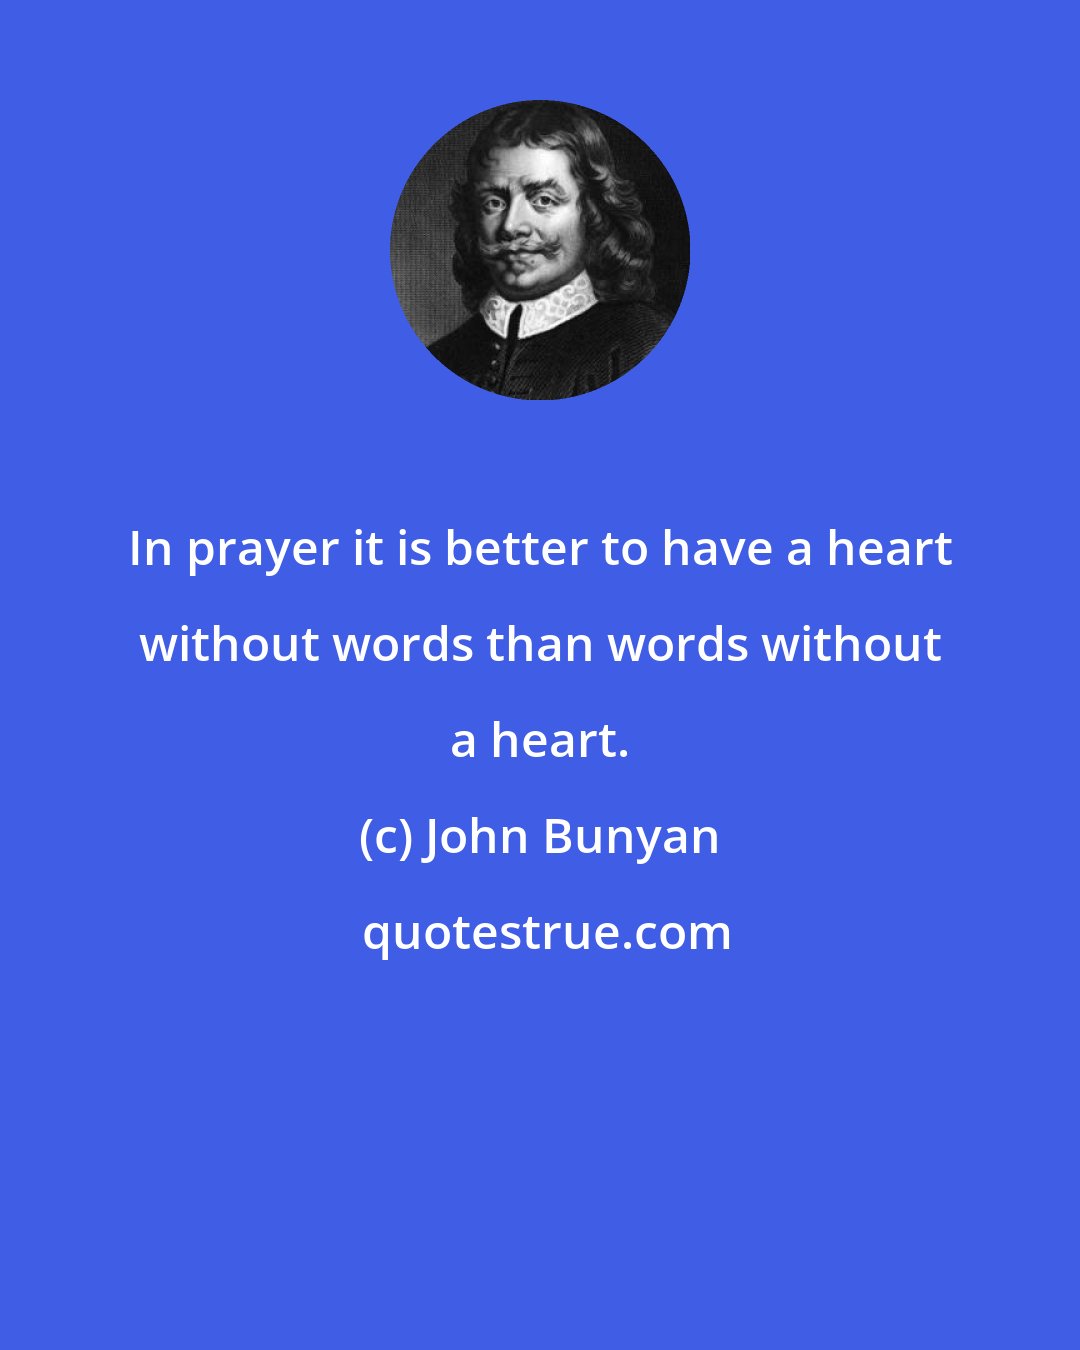 John Bunyan: In prayer it is better to have a heart without words than words without a heart.